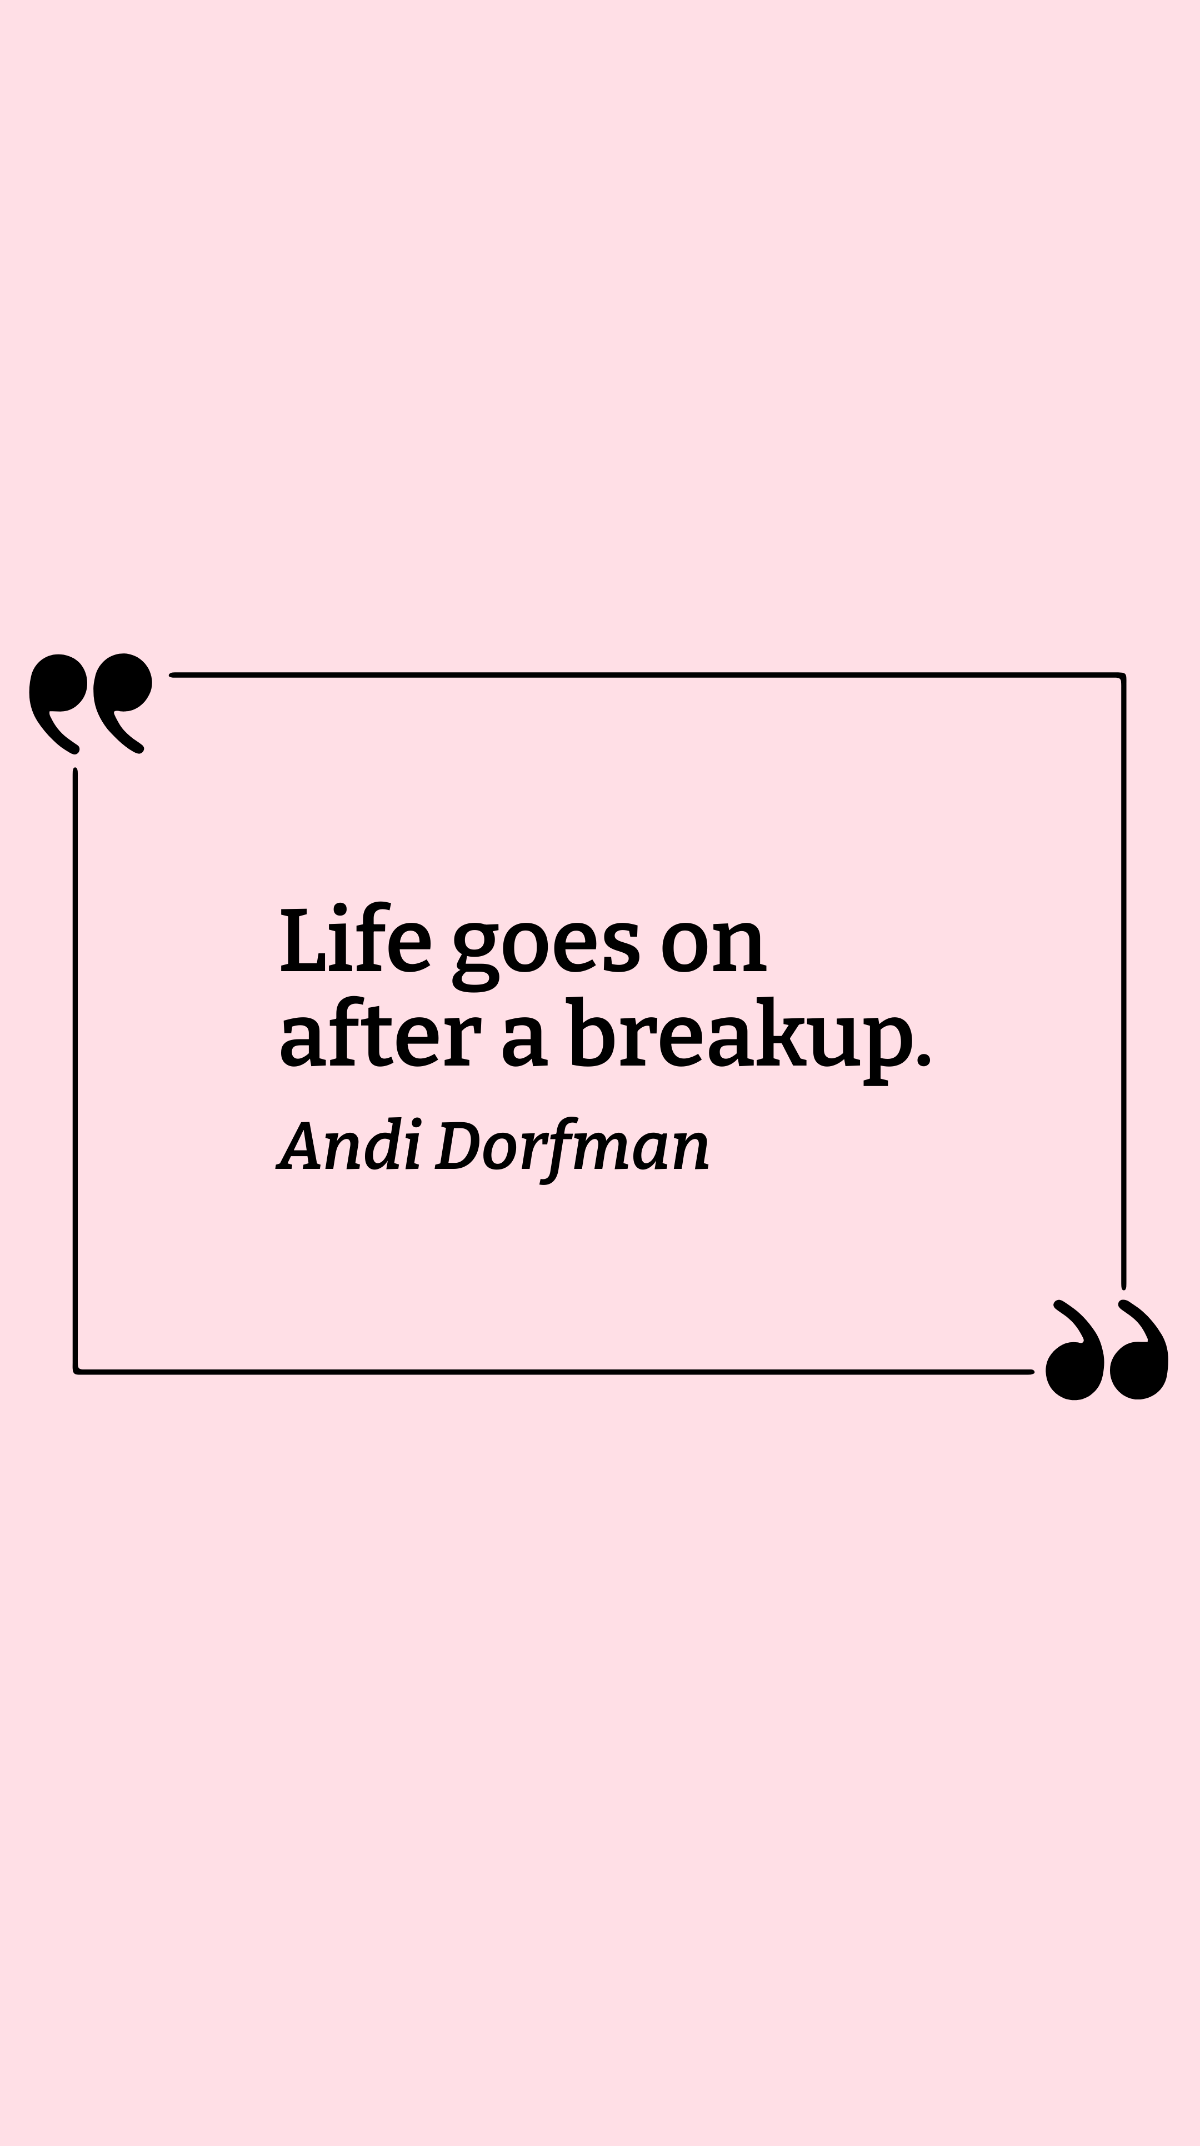 Andi Dorfman - Life goes on after a breakup. Template